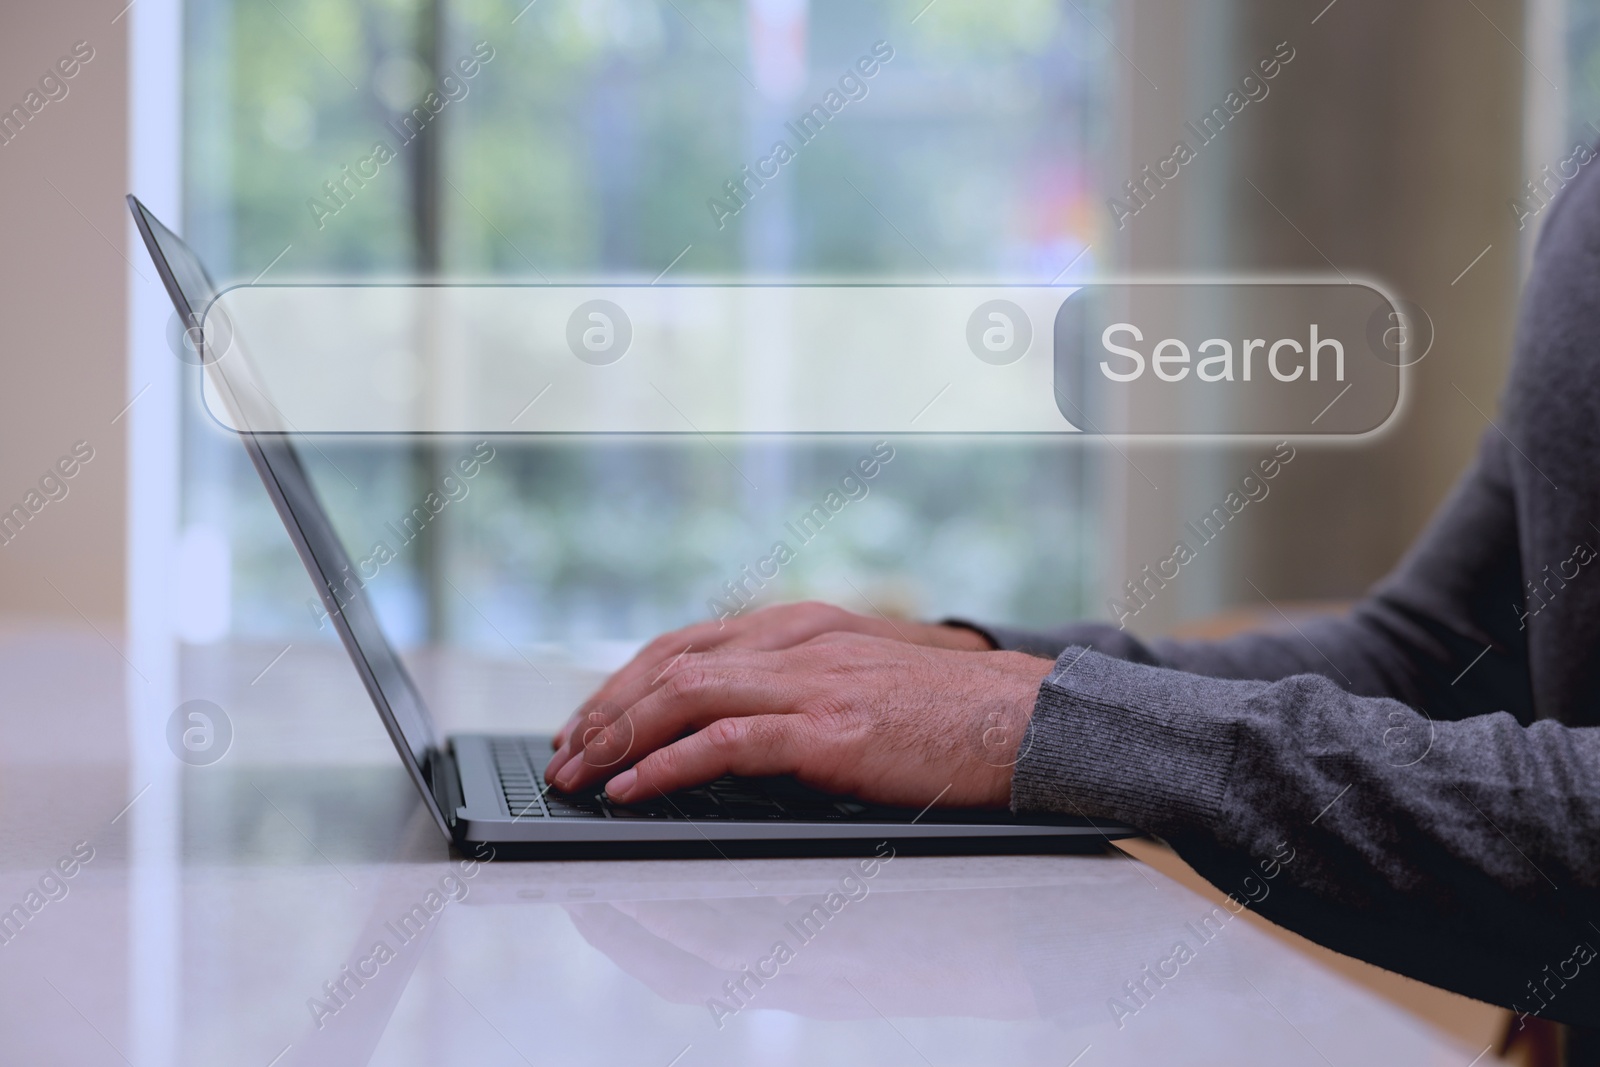 Image of Search bar of website over laptop. Man using computer at table, closeup